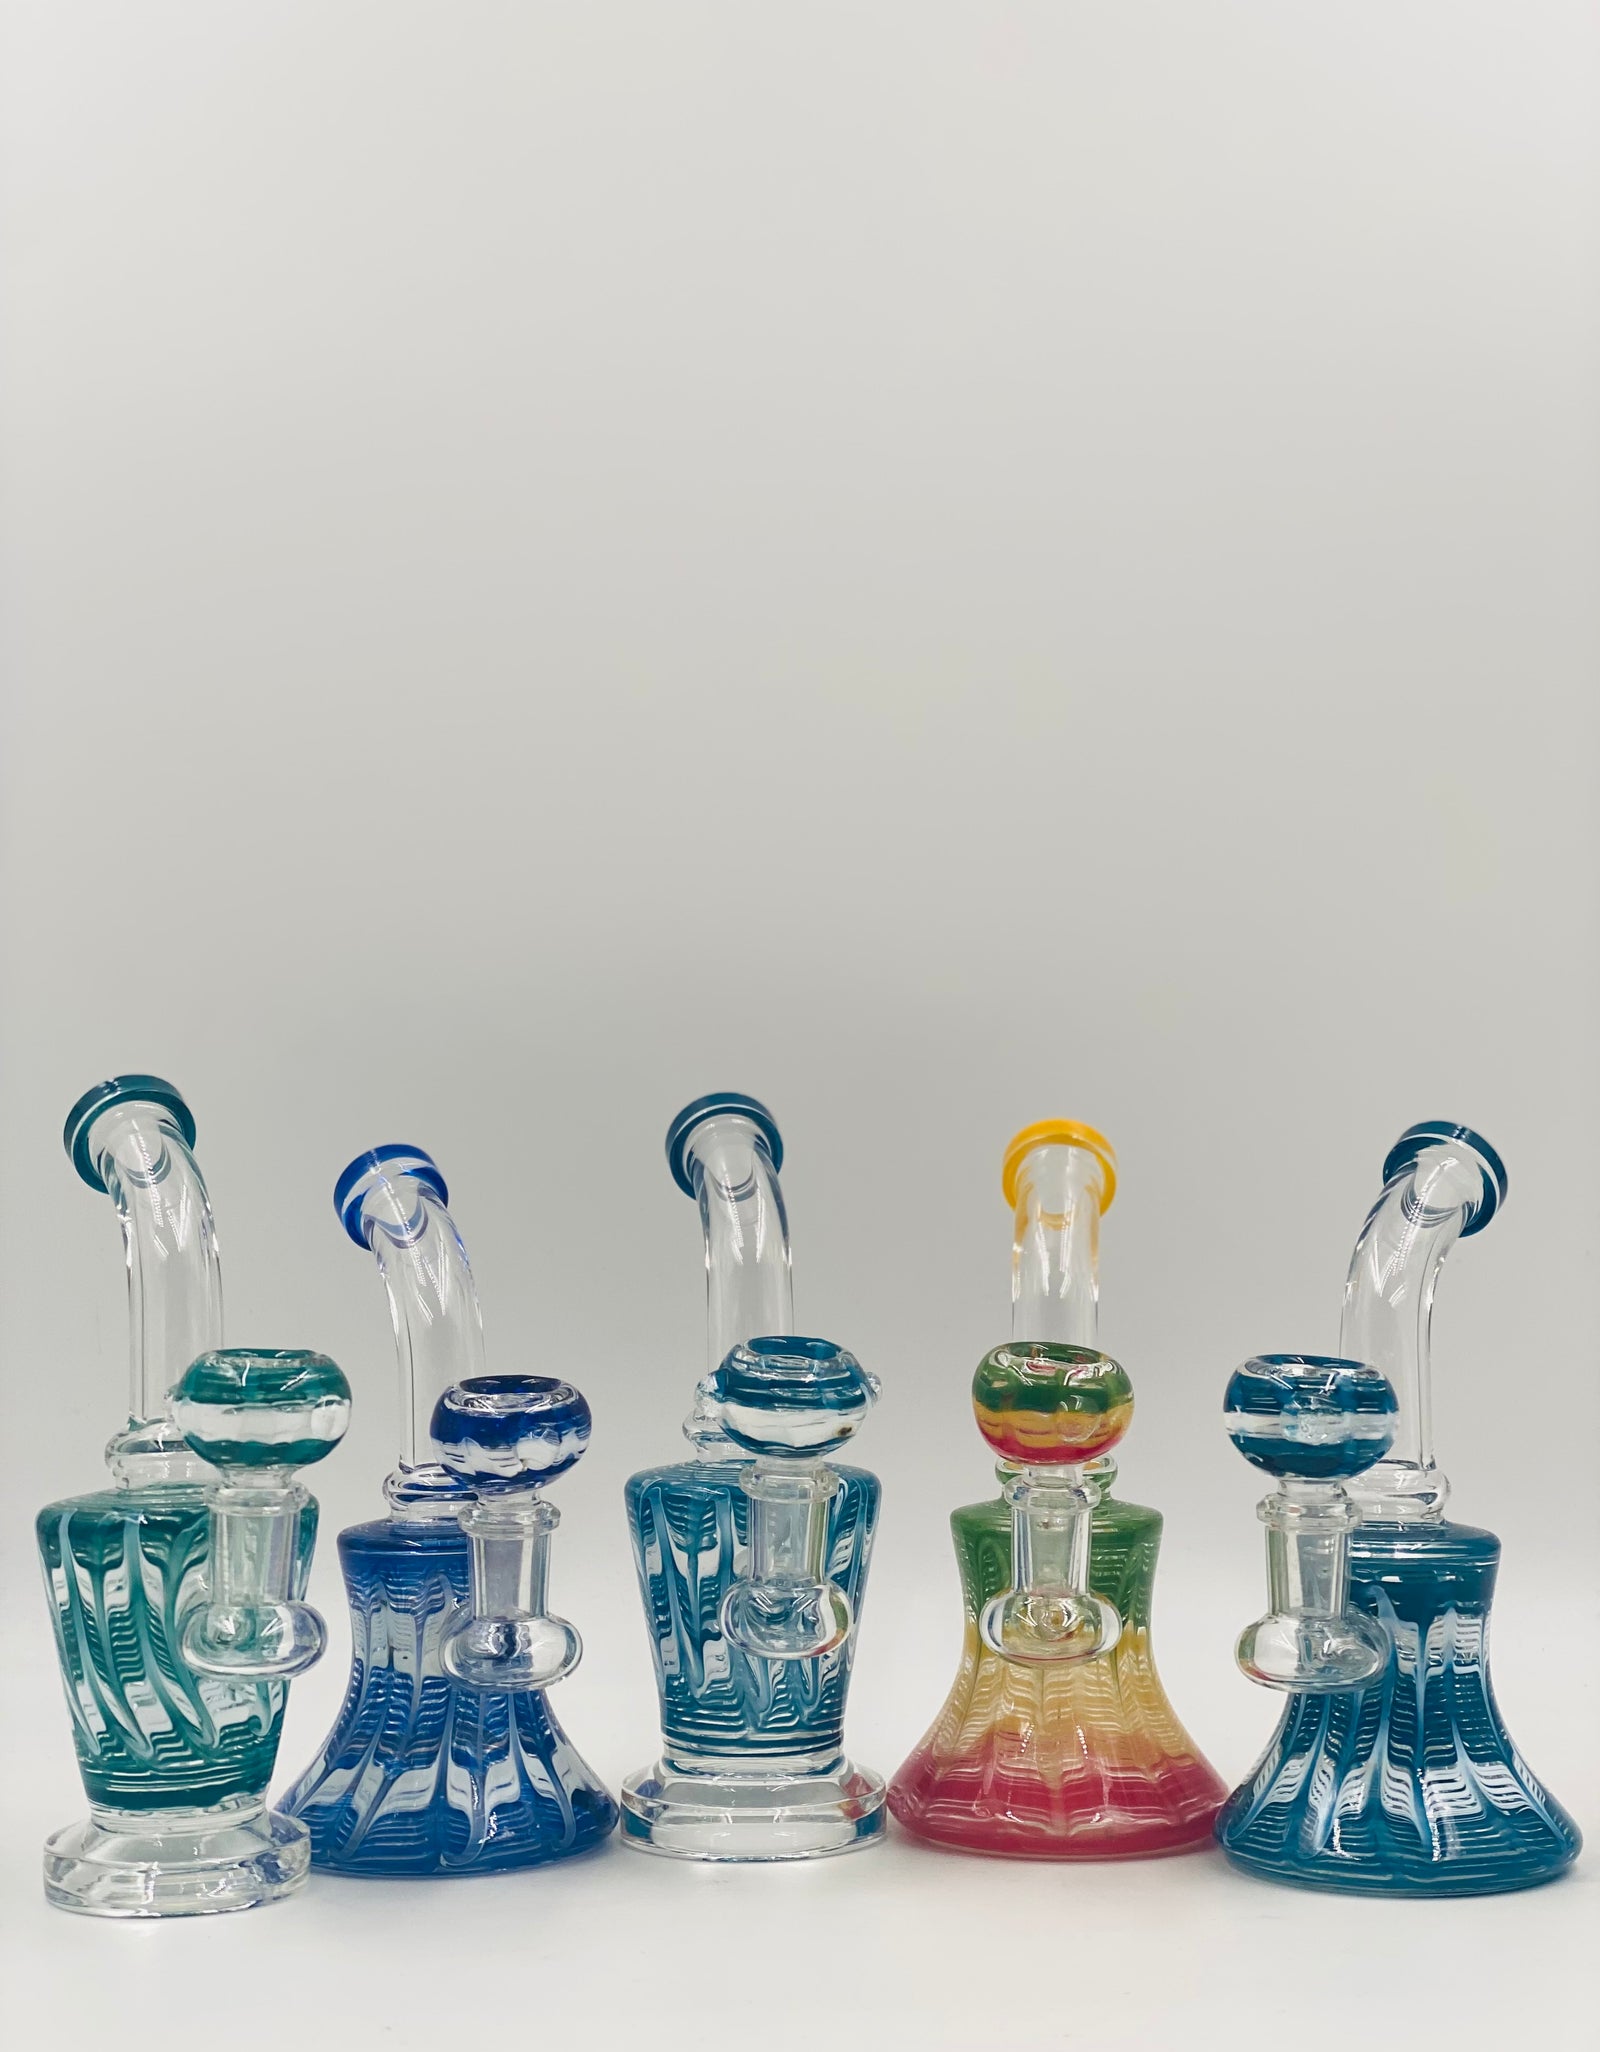 6 INCH GLASS WATER PIPE WITH UPSIDE DOWN COLOR PATTERNS